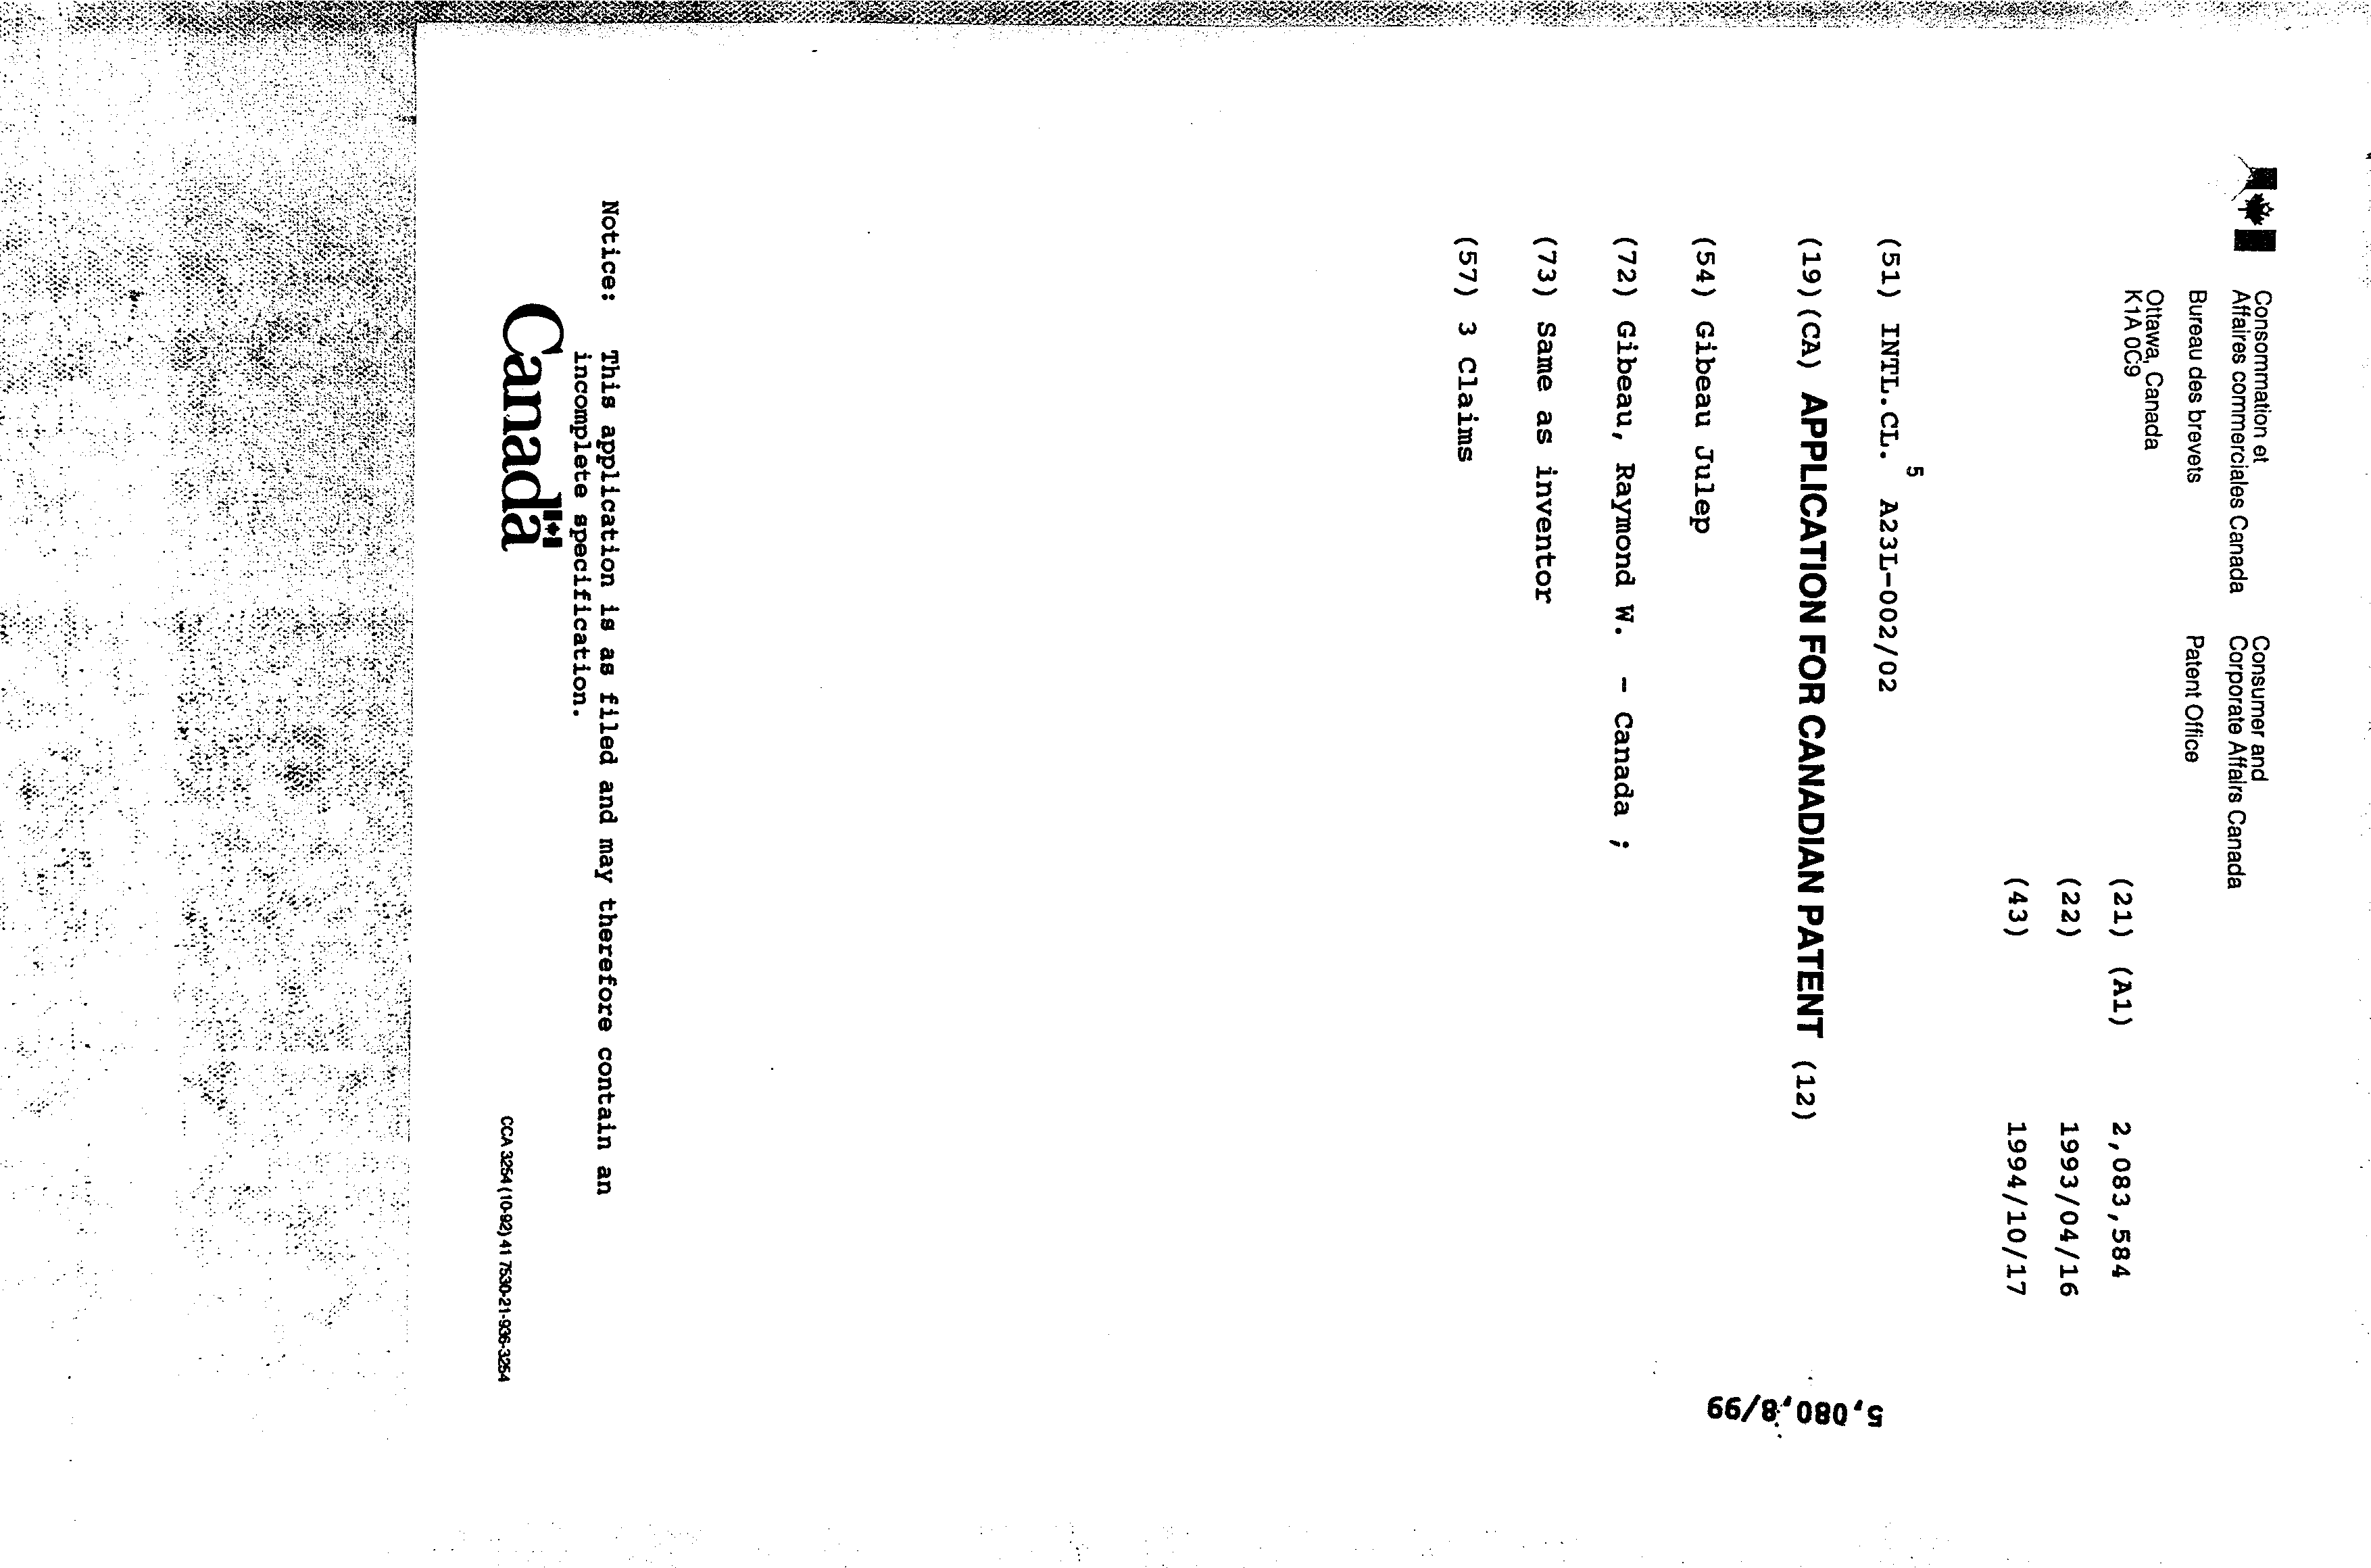 Canadian Patent Document 2083584. Cover Page 19951210. Image 1 of 1